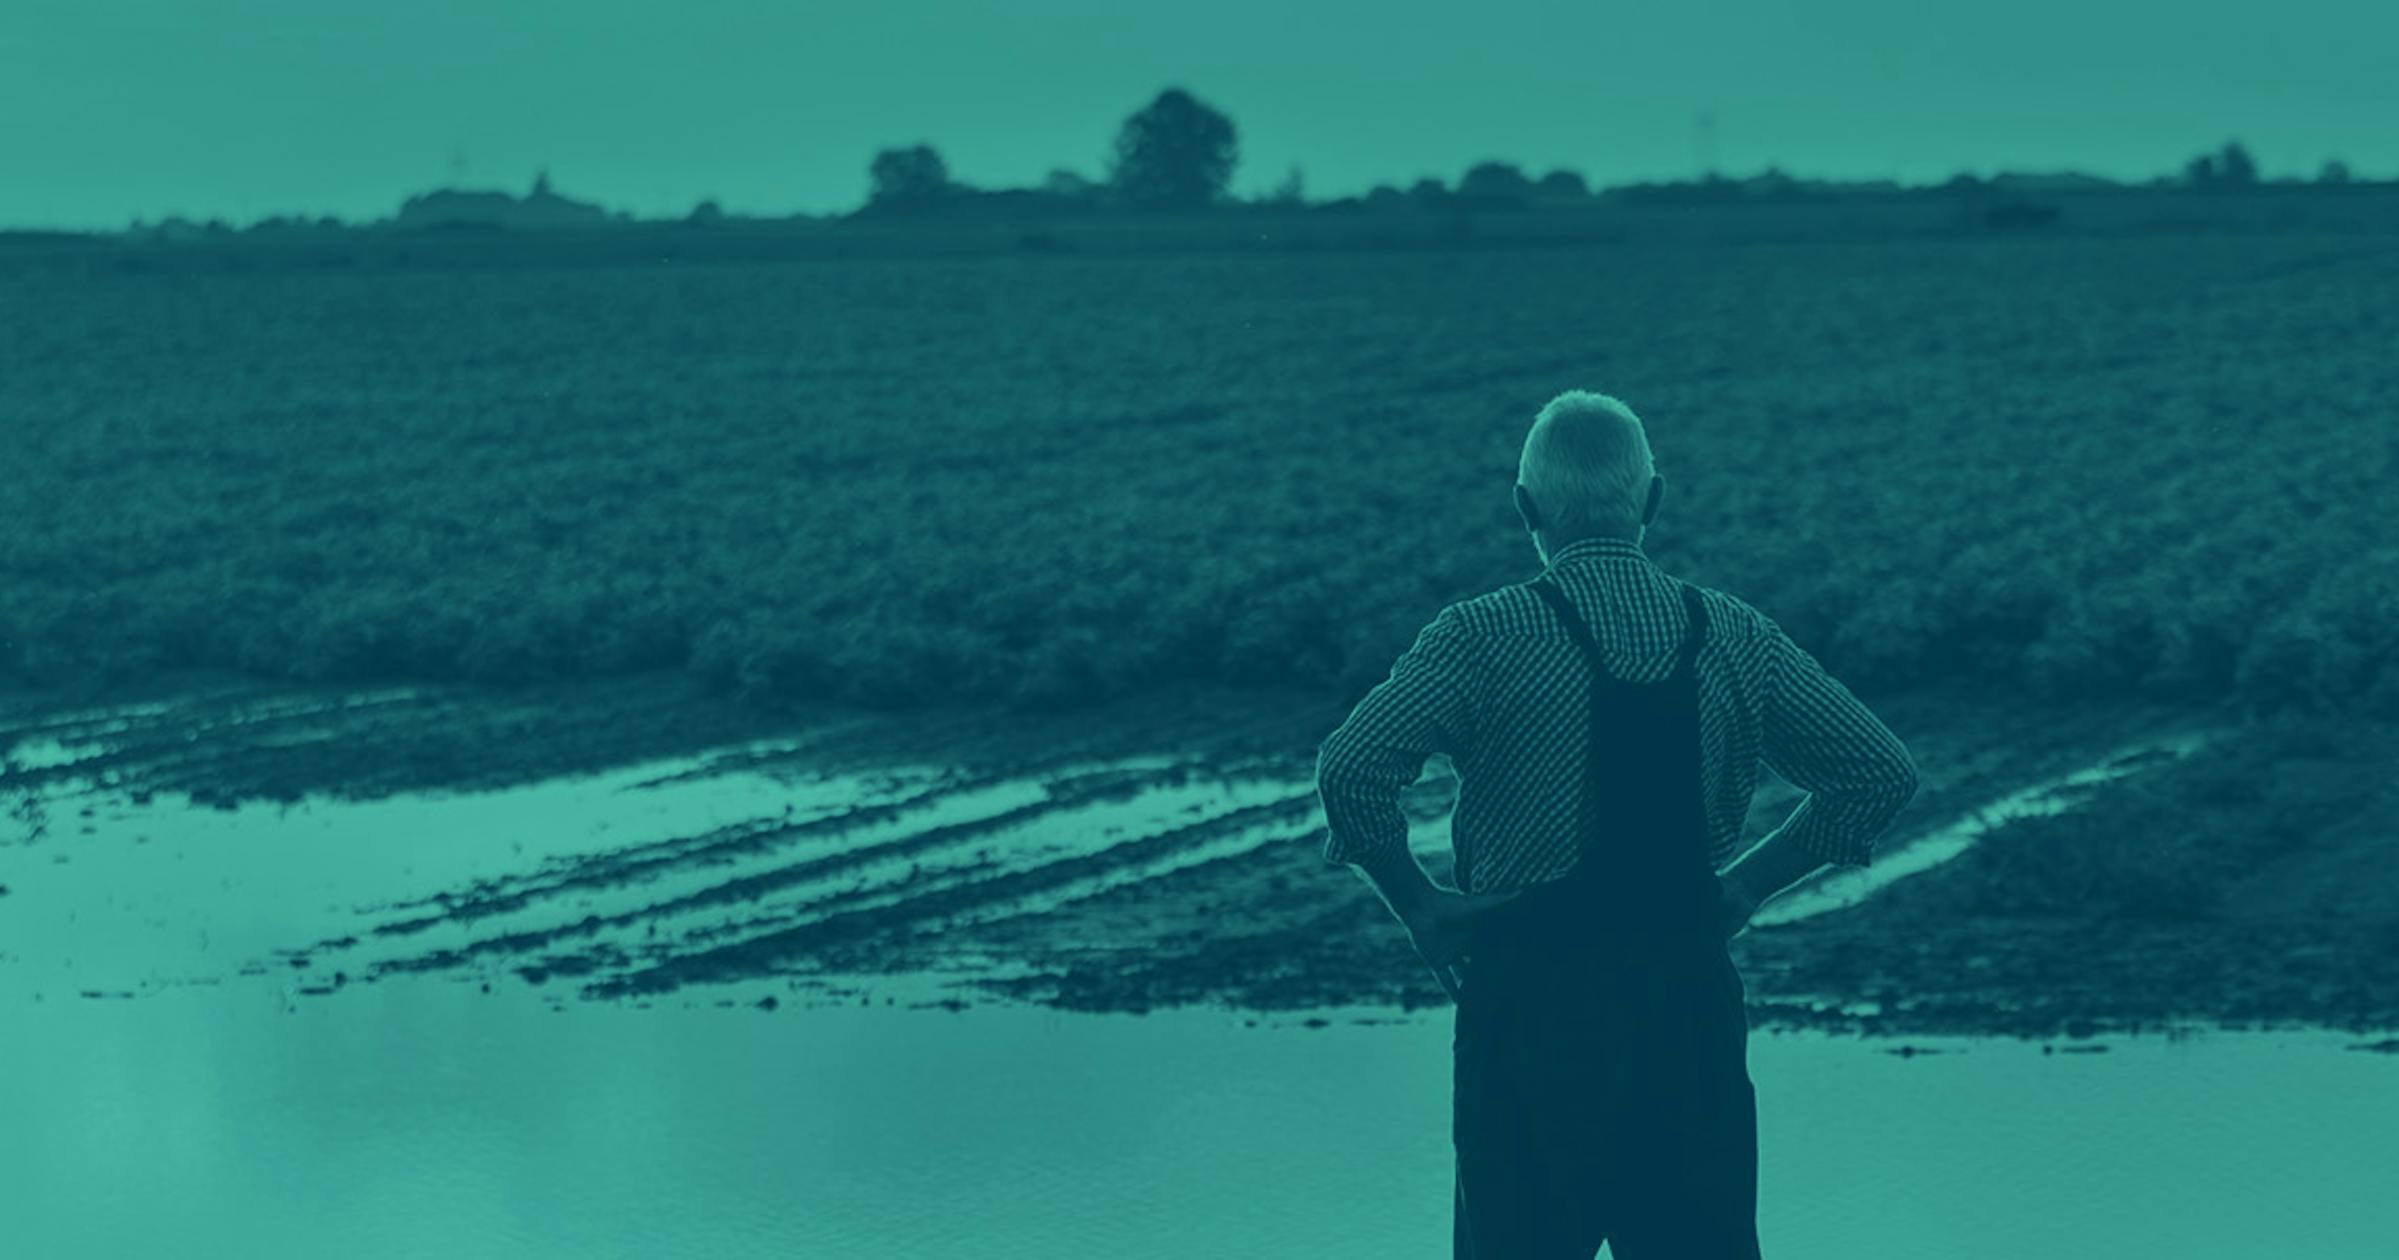 A farmer wearing overalls is shown from behind with his hands on his hips. He's gazing out over his field, which is rows of soil with a pool of water flooding part of it.